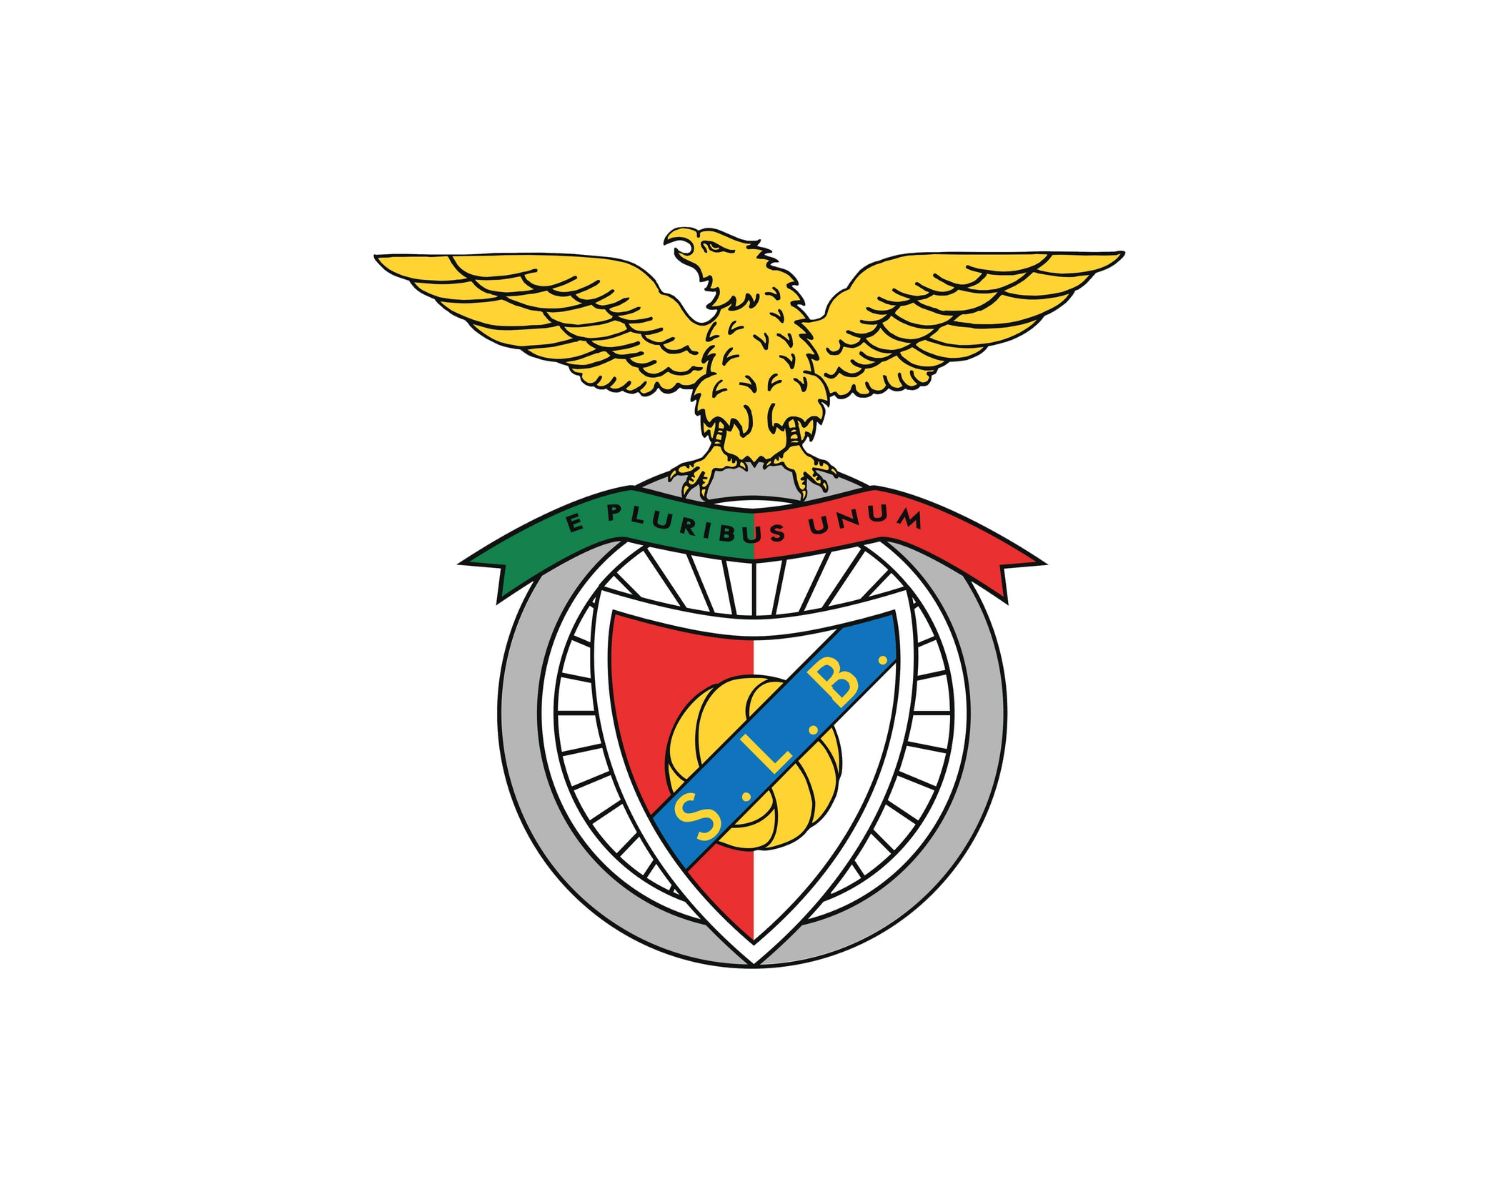 Interesting facts about the Primeira Liga